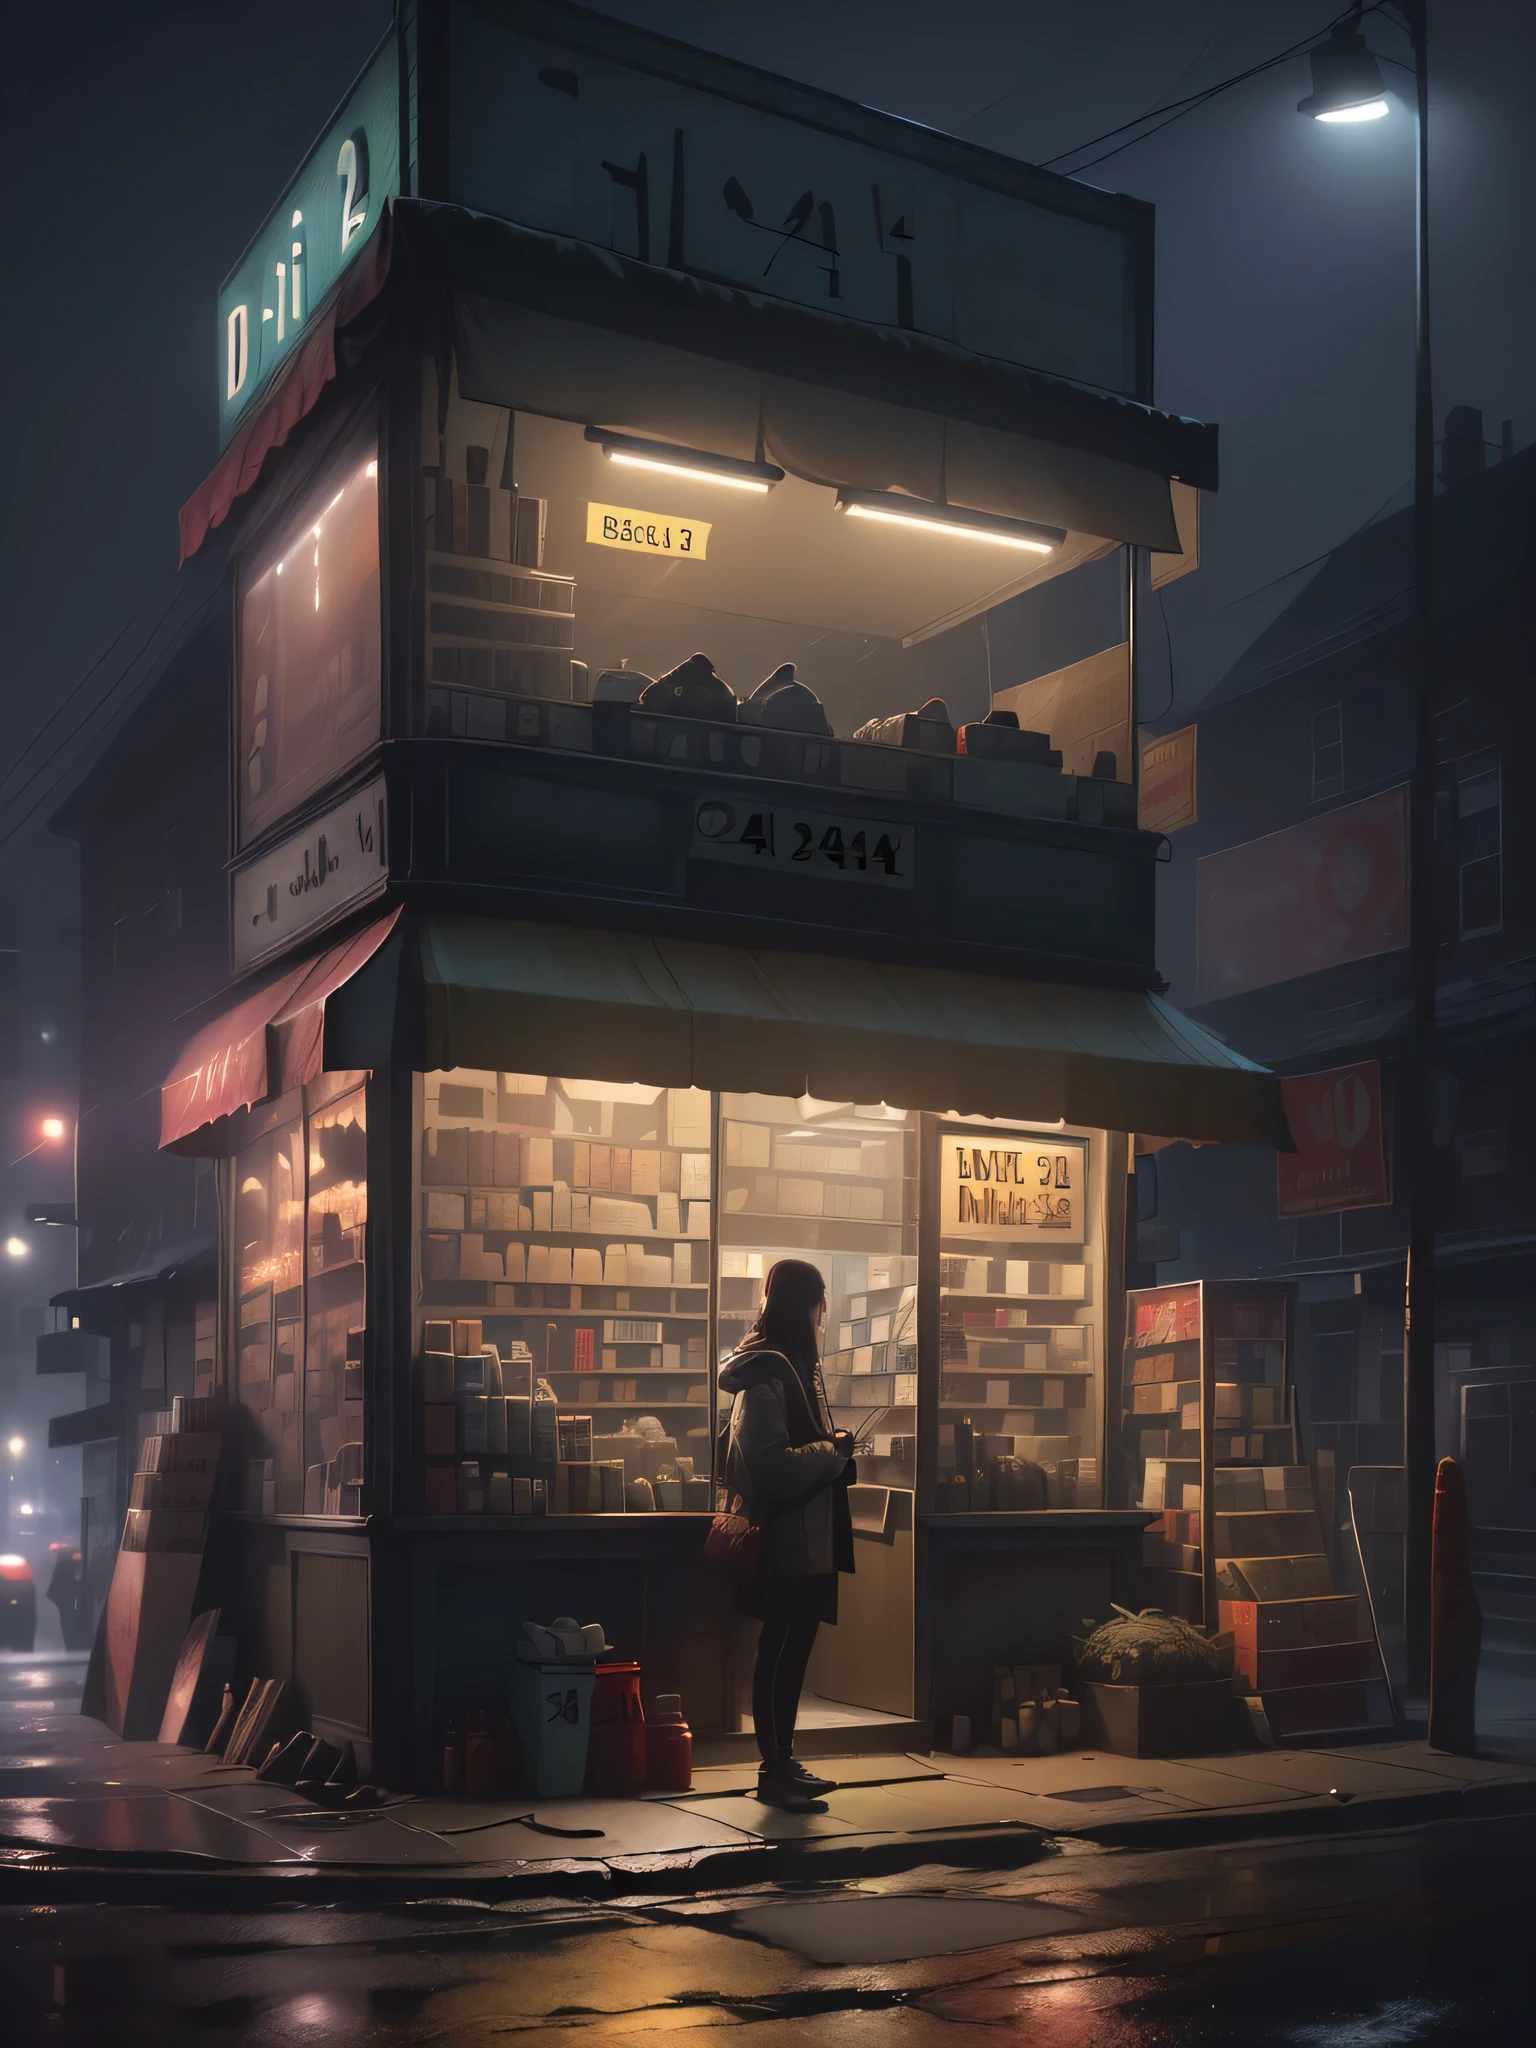 plano general, ((hermosa joven con paraguas esperando un taxi en una esquina de la City, skin texture, highly detailed and realistic:1.5)), (City, street at midnight, wind, flying papers, puddles of water in the streets, ((poster with text, "24 hour store":1.3) ), Old cars, streetlight lighting, Heavy Rain, dark and cold night: 1.3), Masterpiece, hyper realistic, very detailed and well defined, award-winning image, beautiful photography, CGK: 1.4, 8k